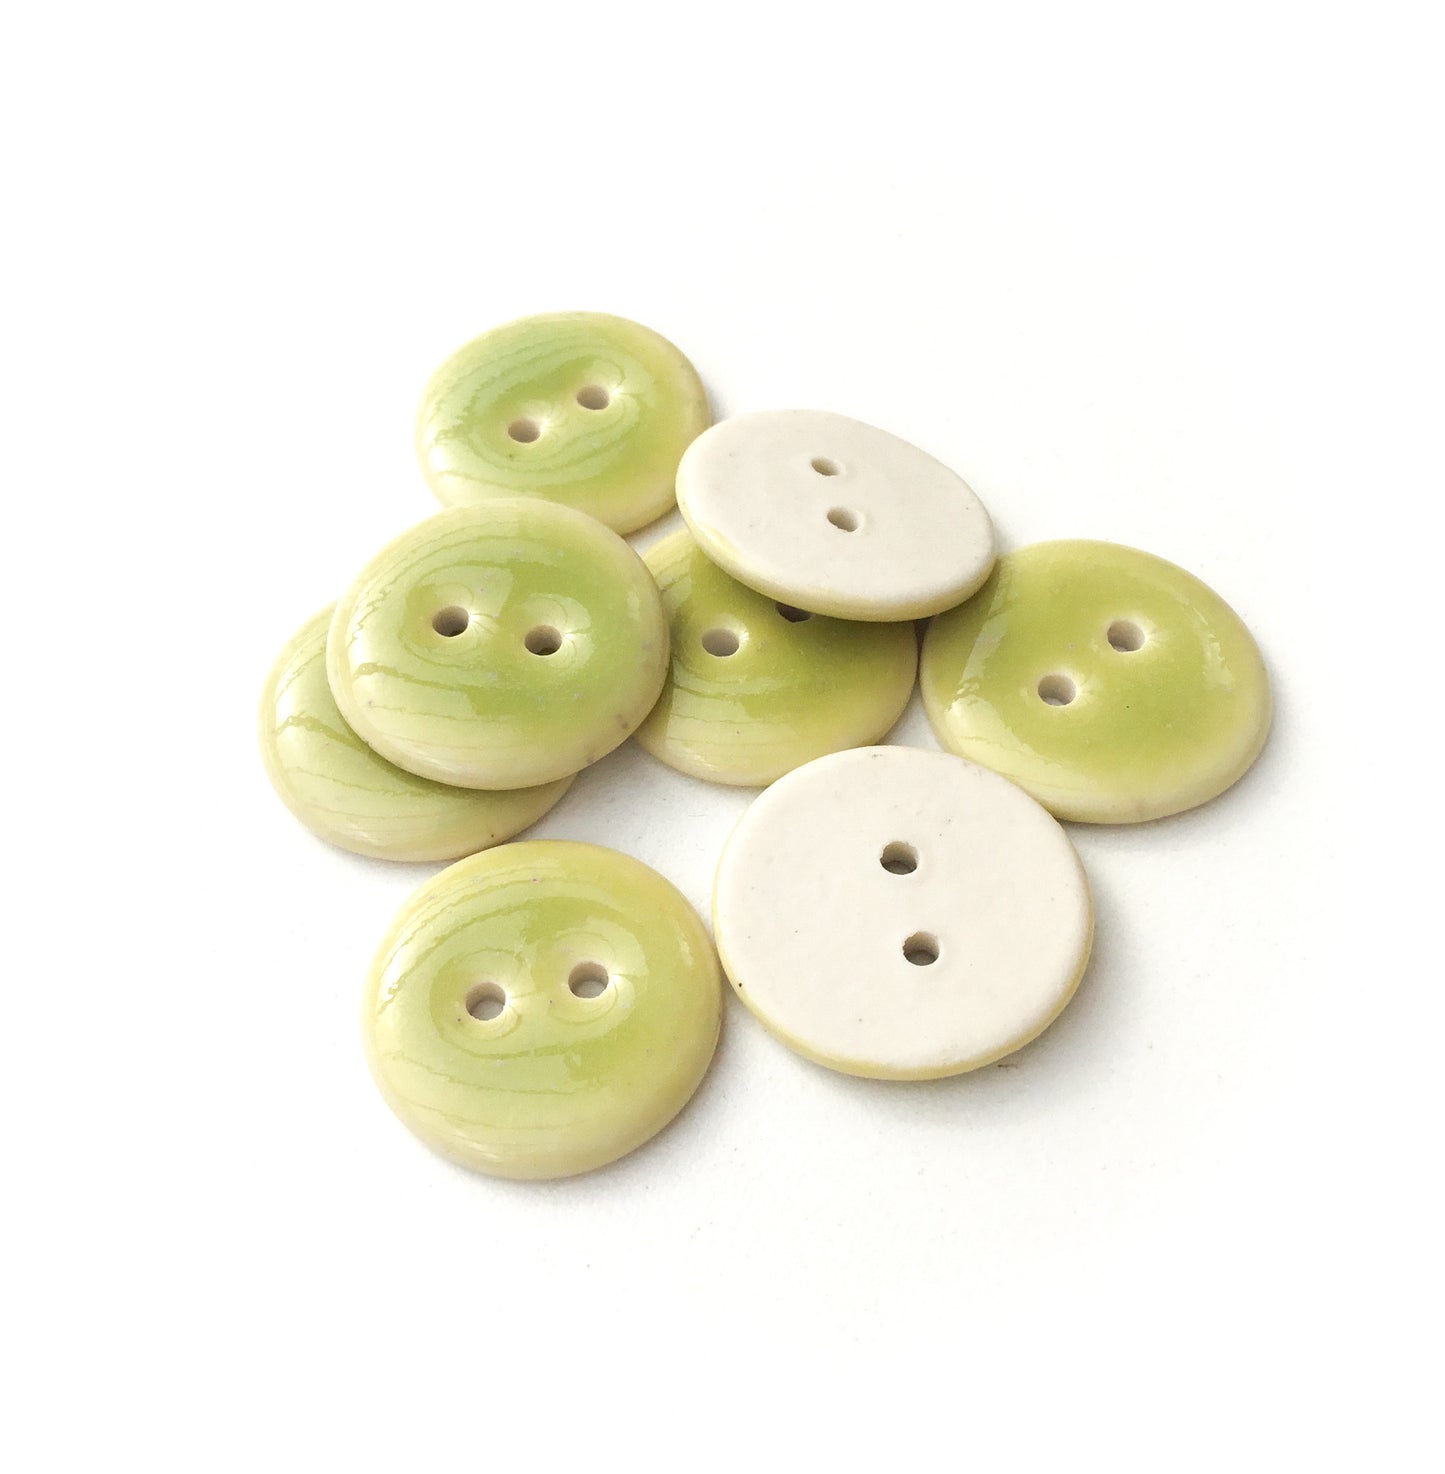 Lime Green Porcelain Buttons - Green Ceramic Buttons - 13/16" - 8 Pack